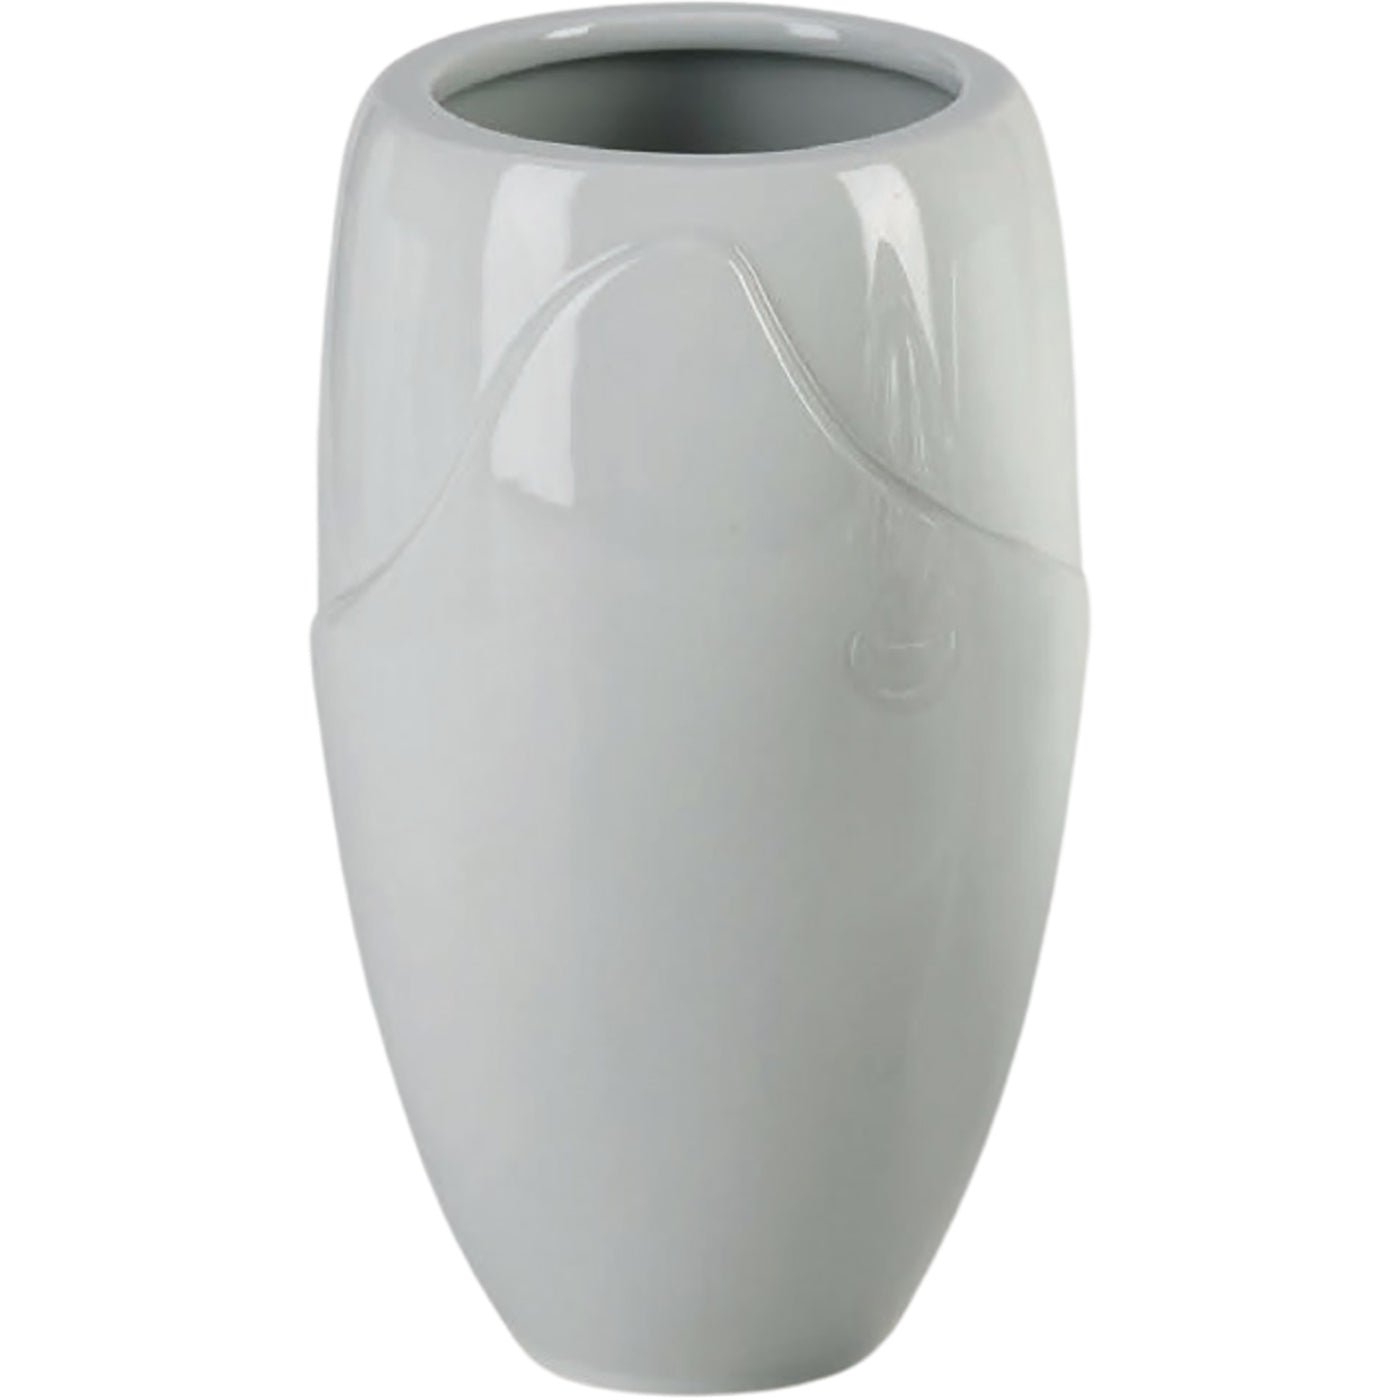 Grave vase Onda 21x13cm - 8.3x5.1in In white porcelain, ground attached ON168P